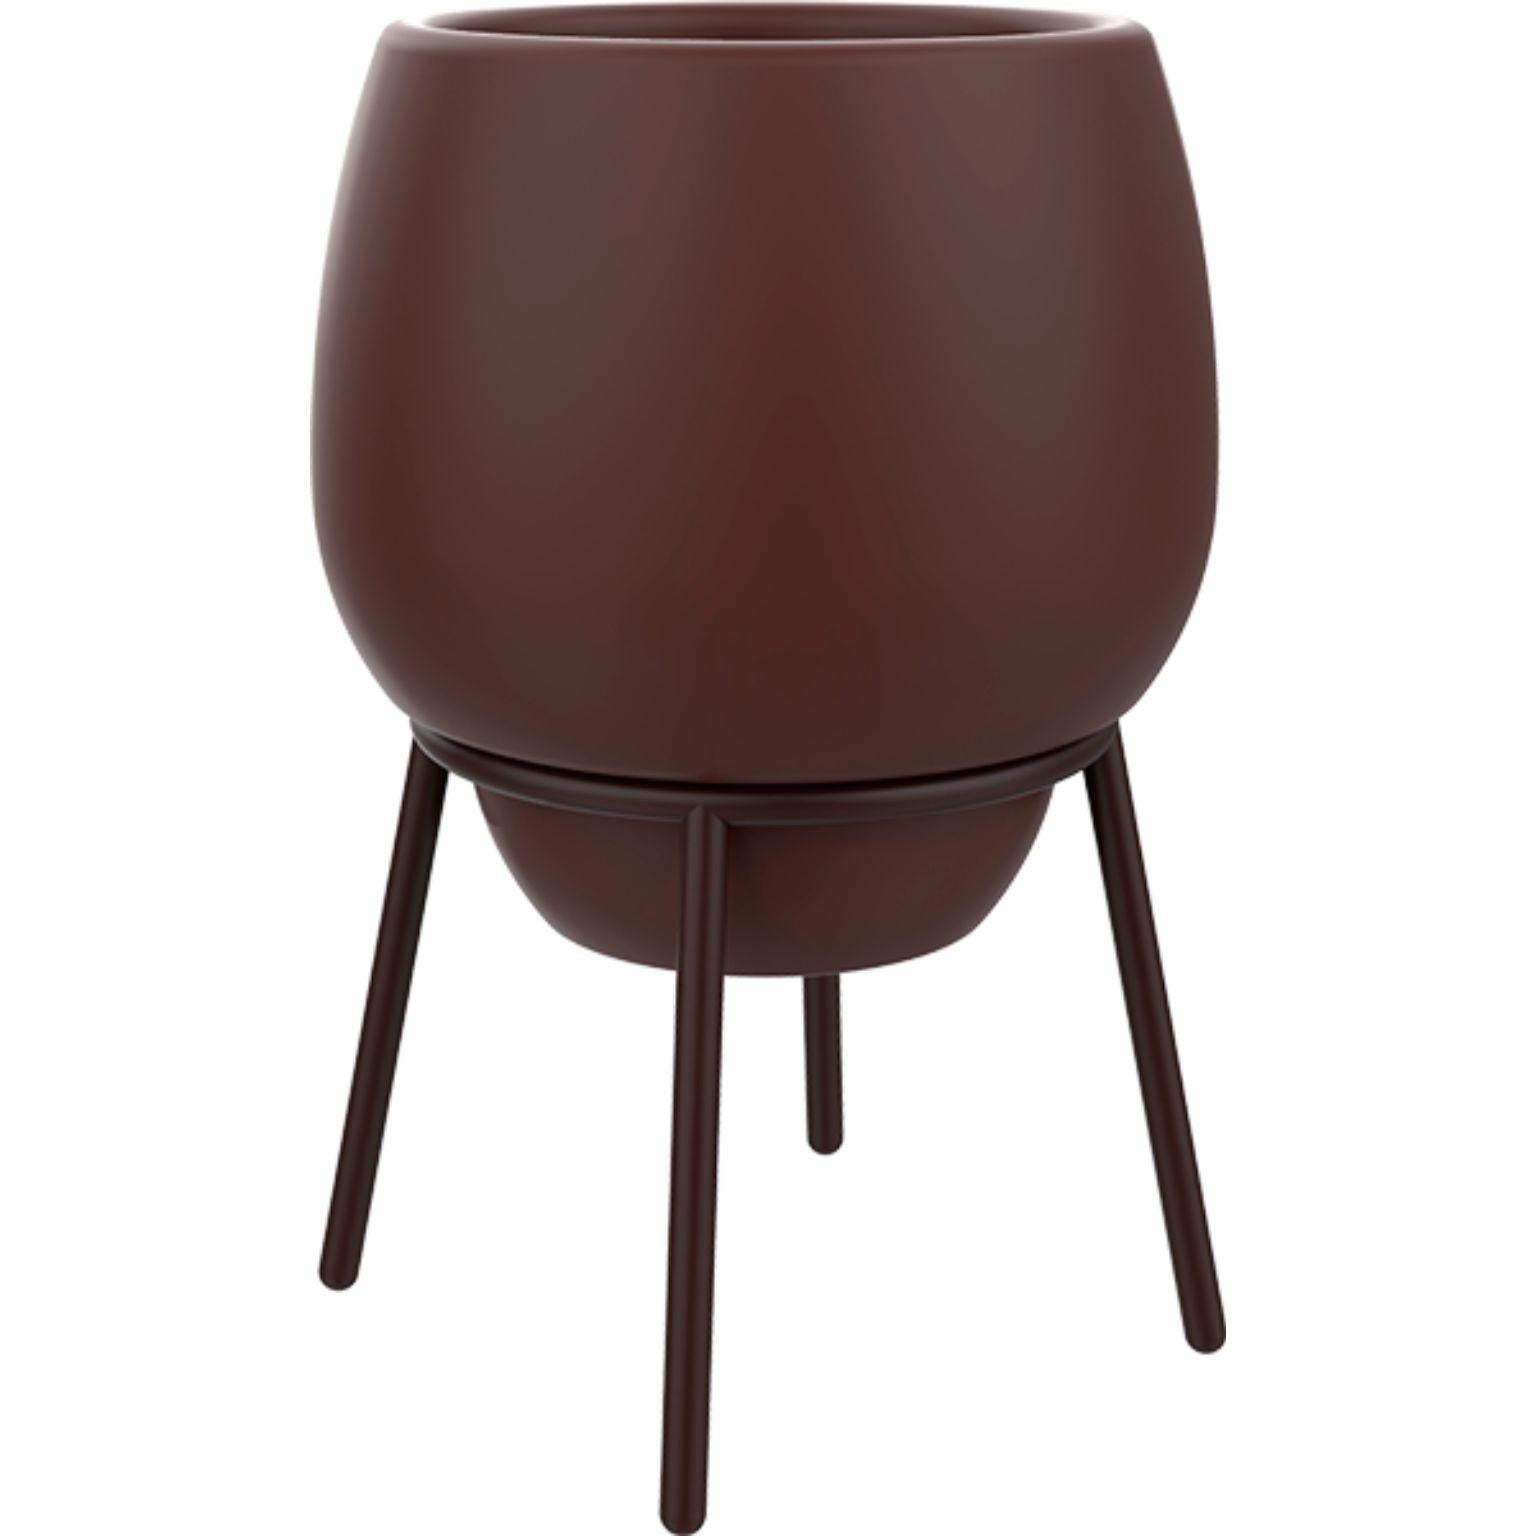 Lace chocolate 50 low pot by Mowee
Dimensions: Ø 55 x H 76 cm.
Material: Polyethylene and stainless steel.
Weight: 6 kg.
Also available in different colors and finishes (Lacquered or retroilluminated).

Lace is a collection of furniture made